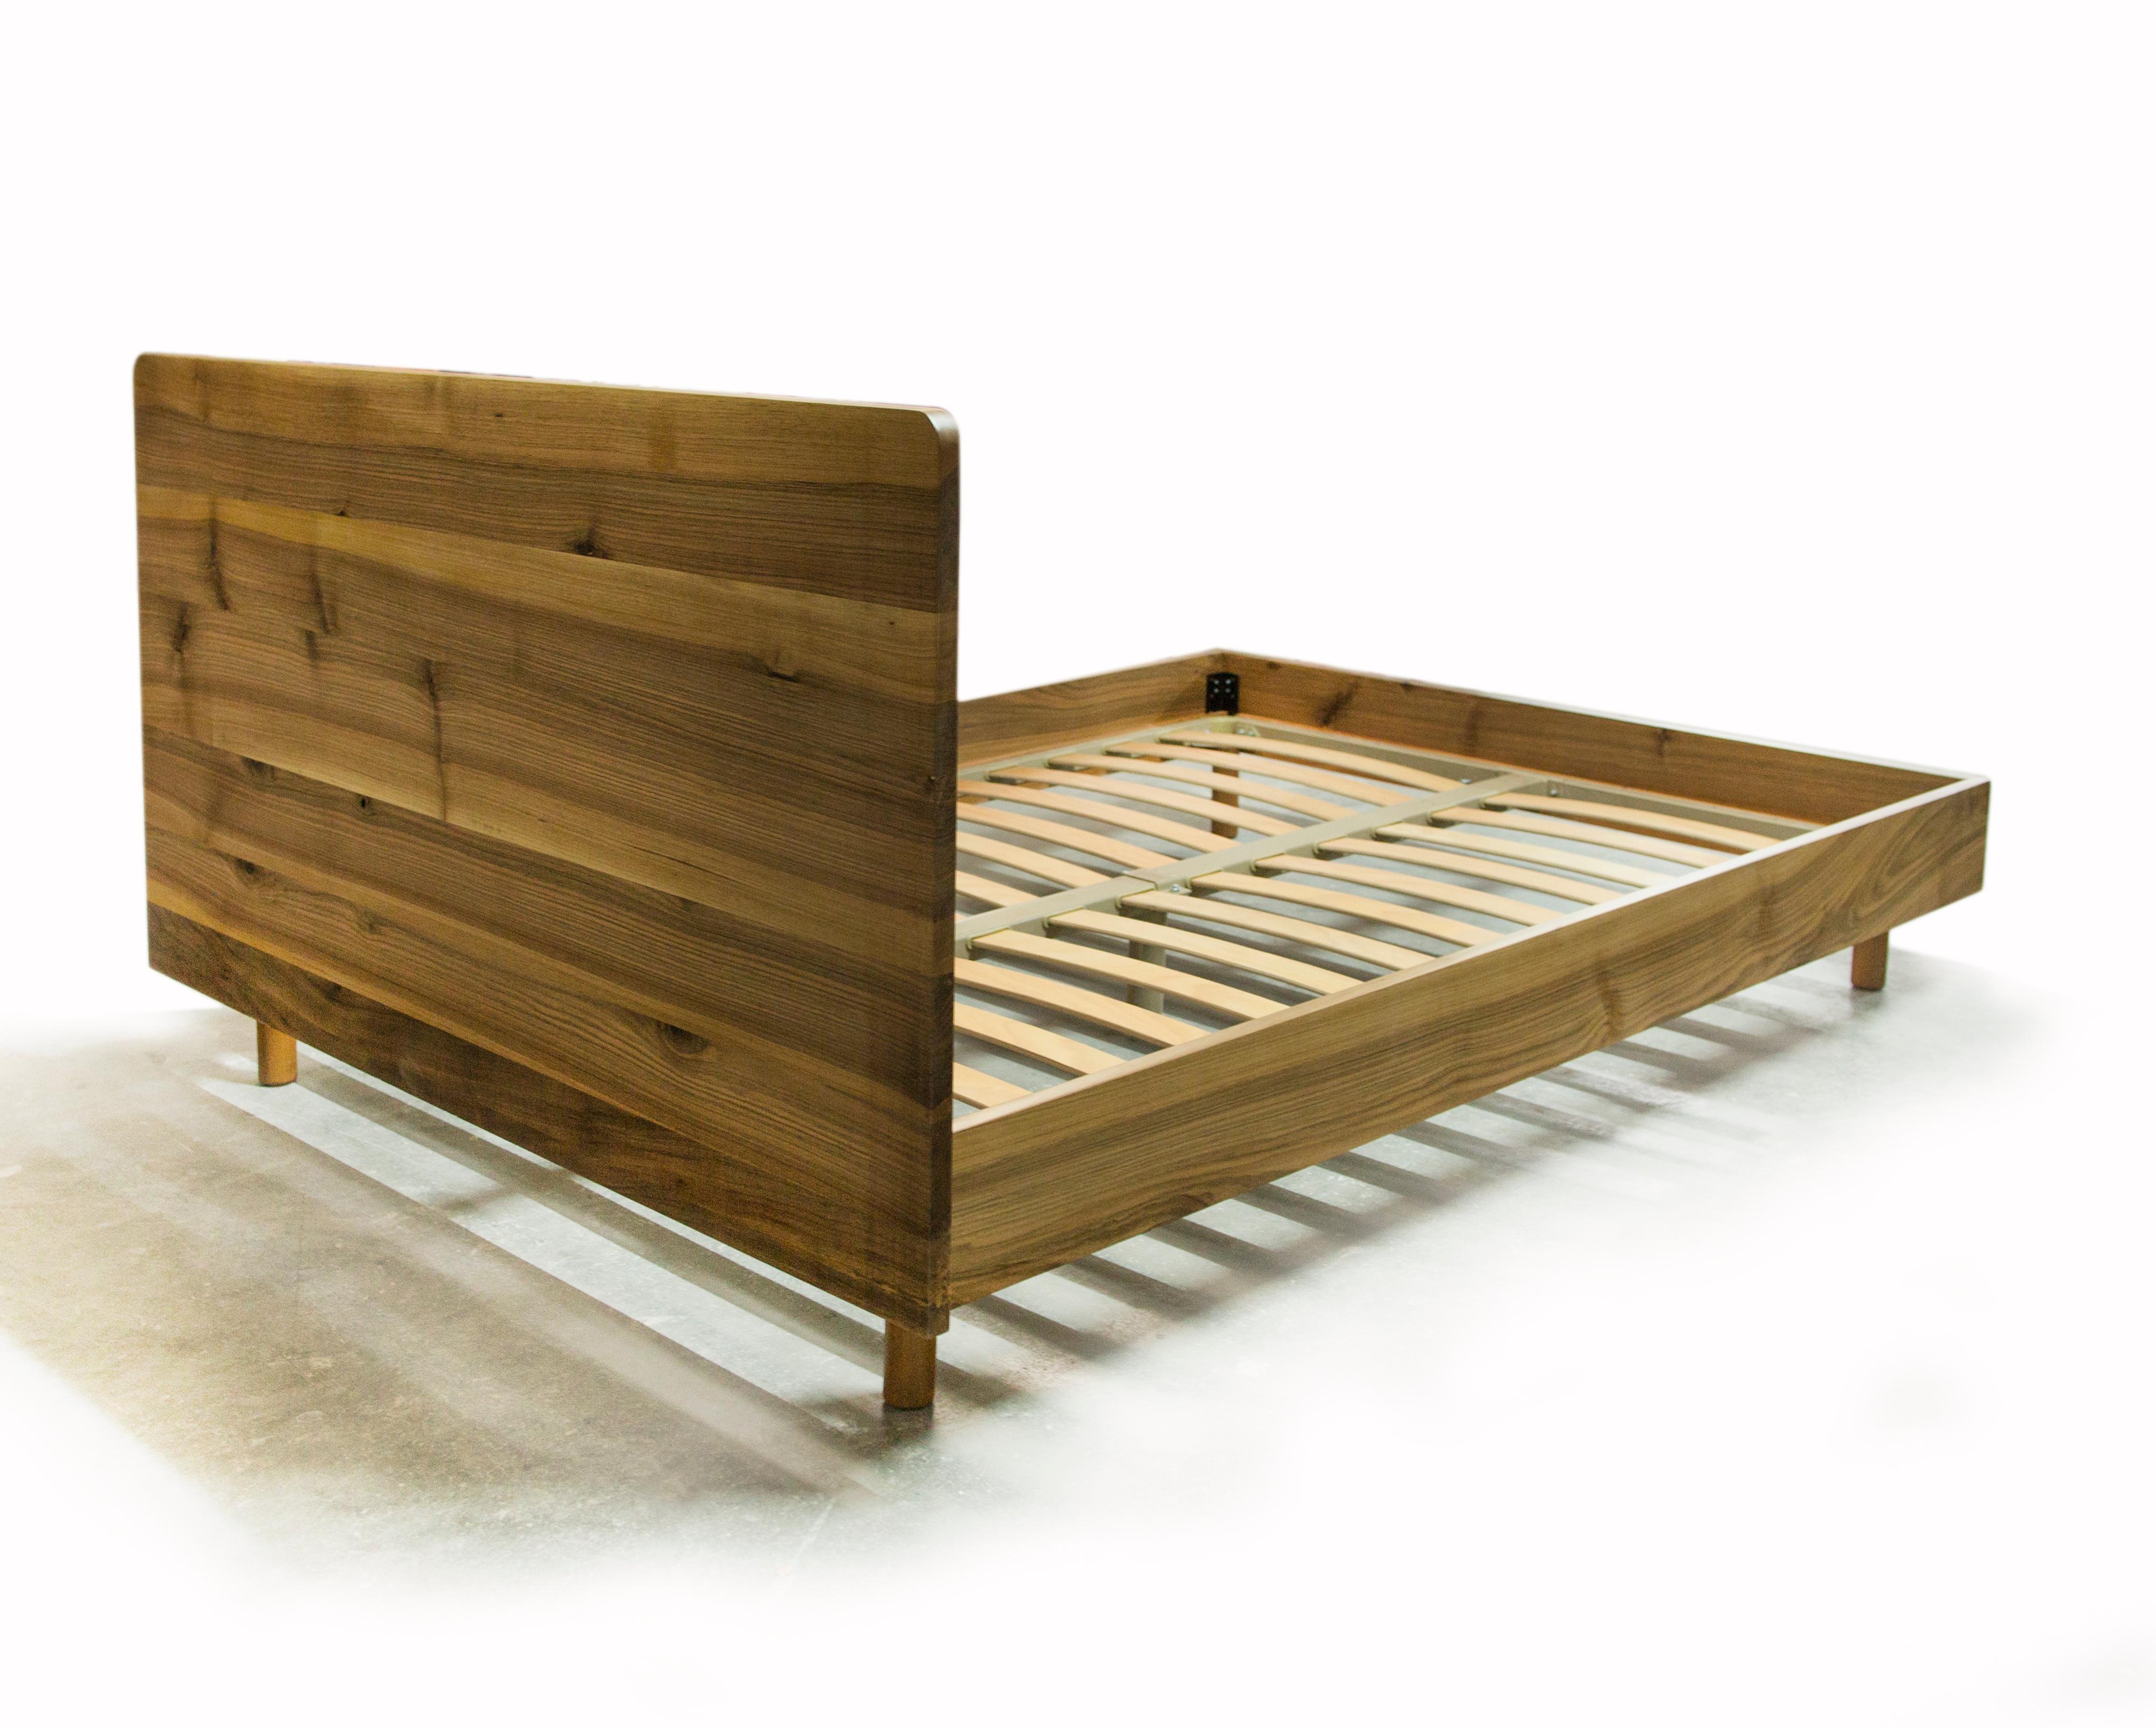 Emirgan bed by Rectangle Studio
Dimensions: W 153 x D 208.5 x H 100 cm 
 140 cm for warm mattress
Materials: Massive walnut, natural wood oil

Emirgan 'bed is designed to feel the material and sleep with the smell of massive wood.

Emirgan